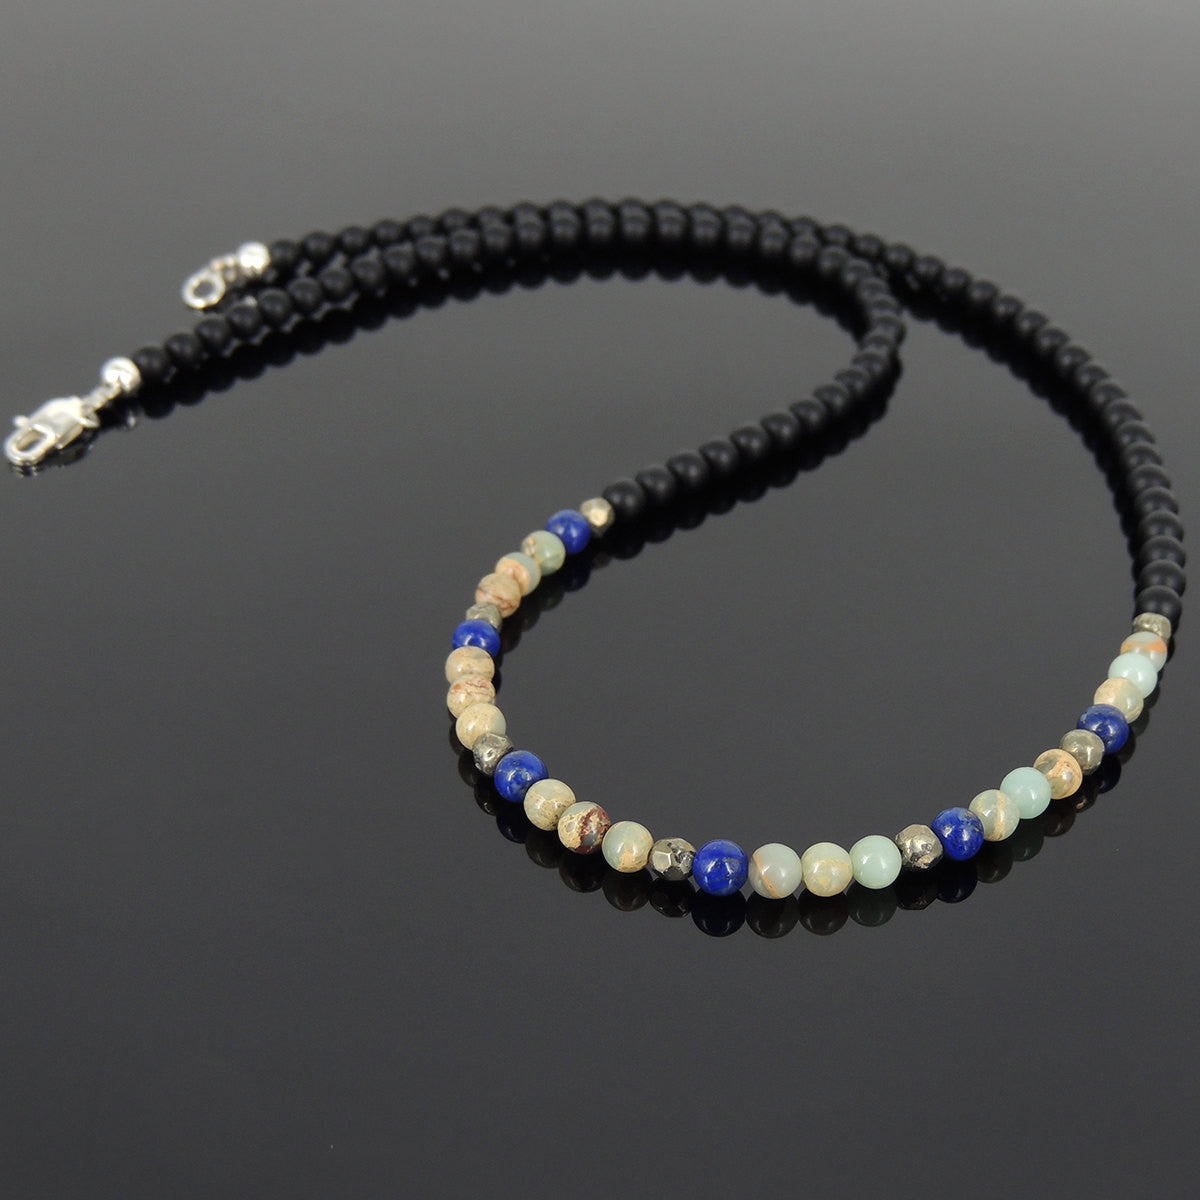 4mm Matte Black Onyx, Jasper Stone, Lapis Lazuli, & Faceted Gold Pyrite Healing Gemstone Necklace with S925 Sterling Silver Spacer Beads & Clasp - Handmade by Gem & Silver NK058